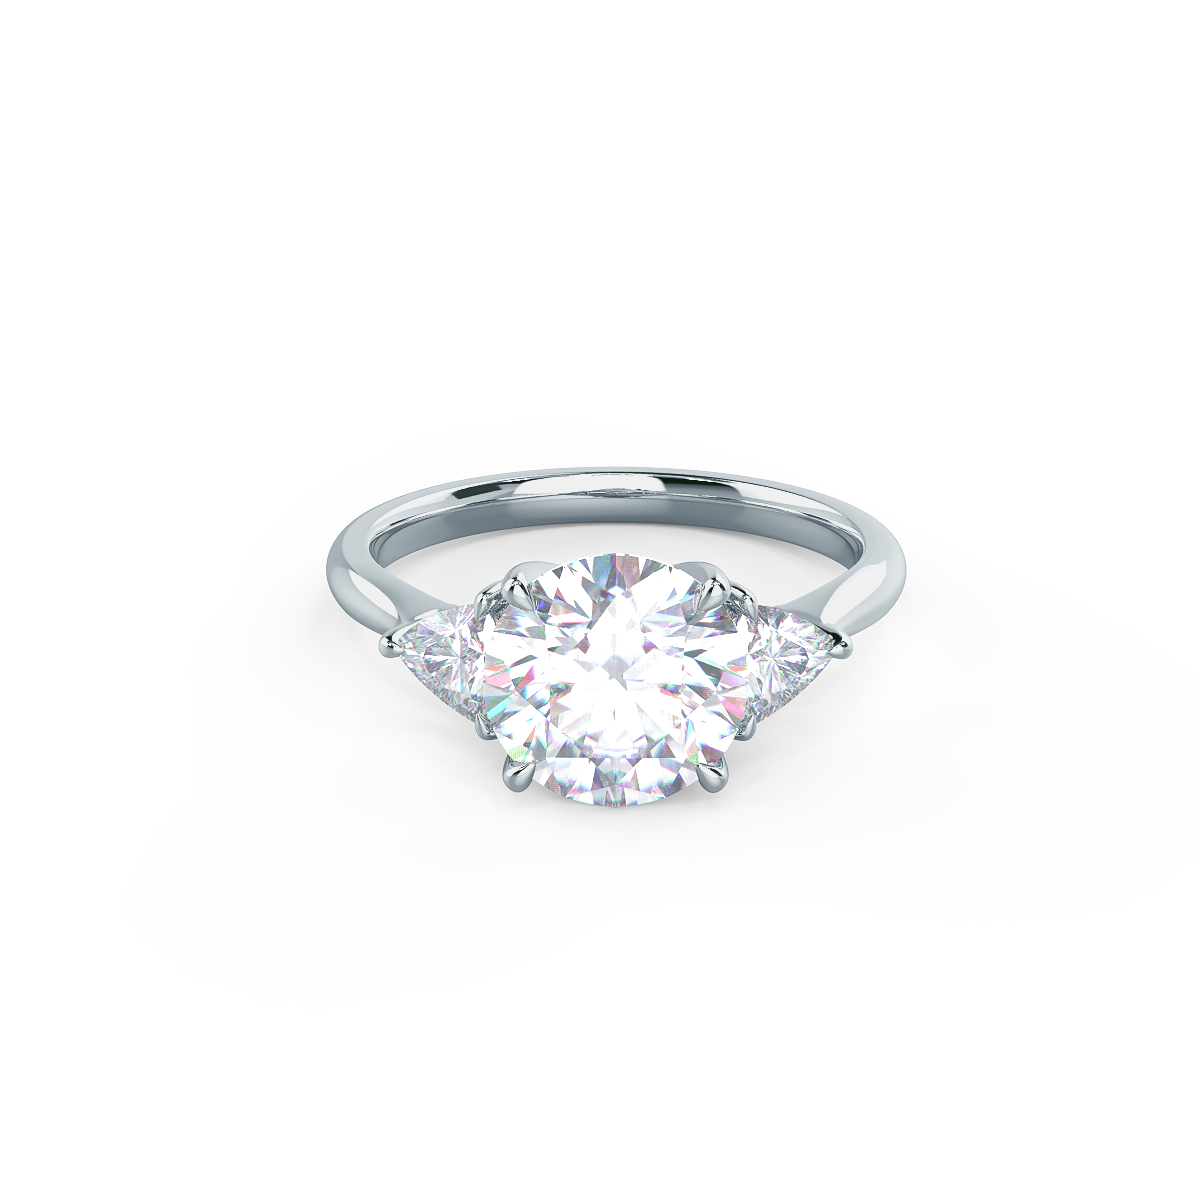 ROUND AND TRILLION SETTING  Lab-Created Diamond Ring DEF Color VS+ Clarity